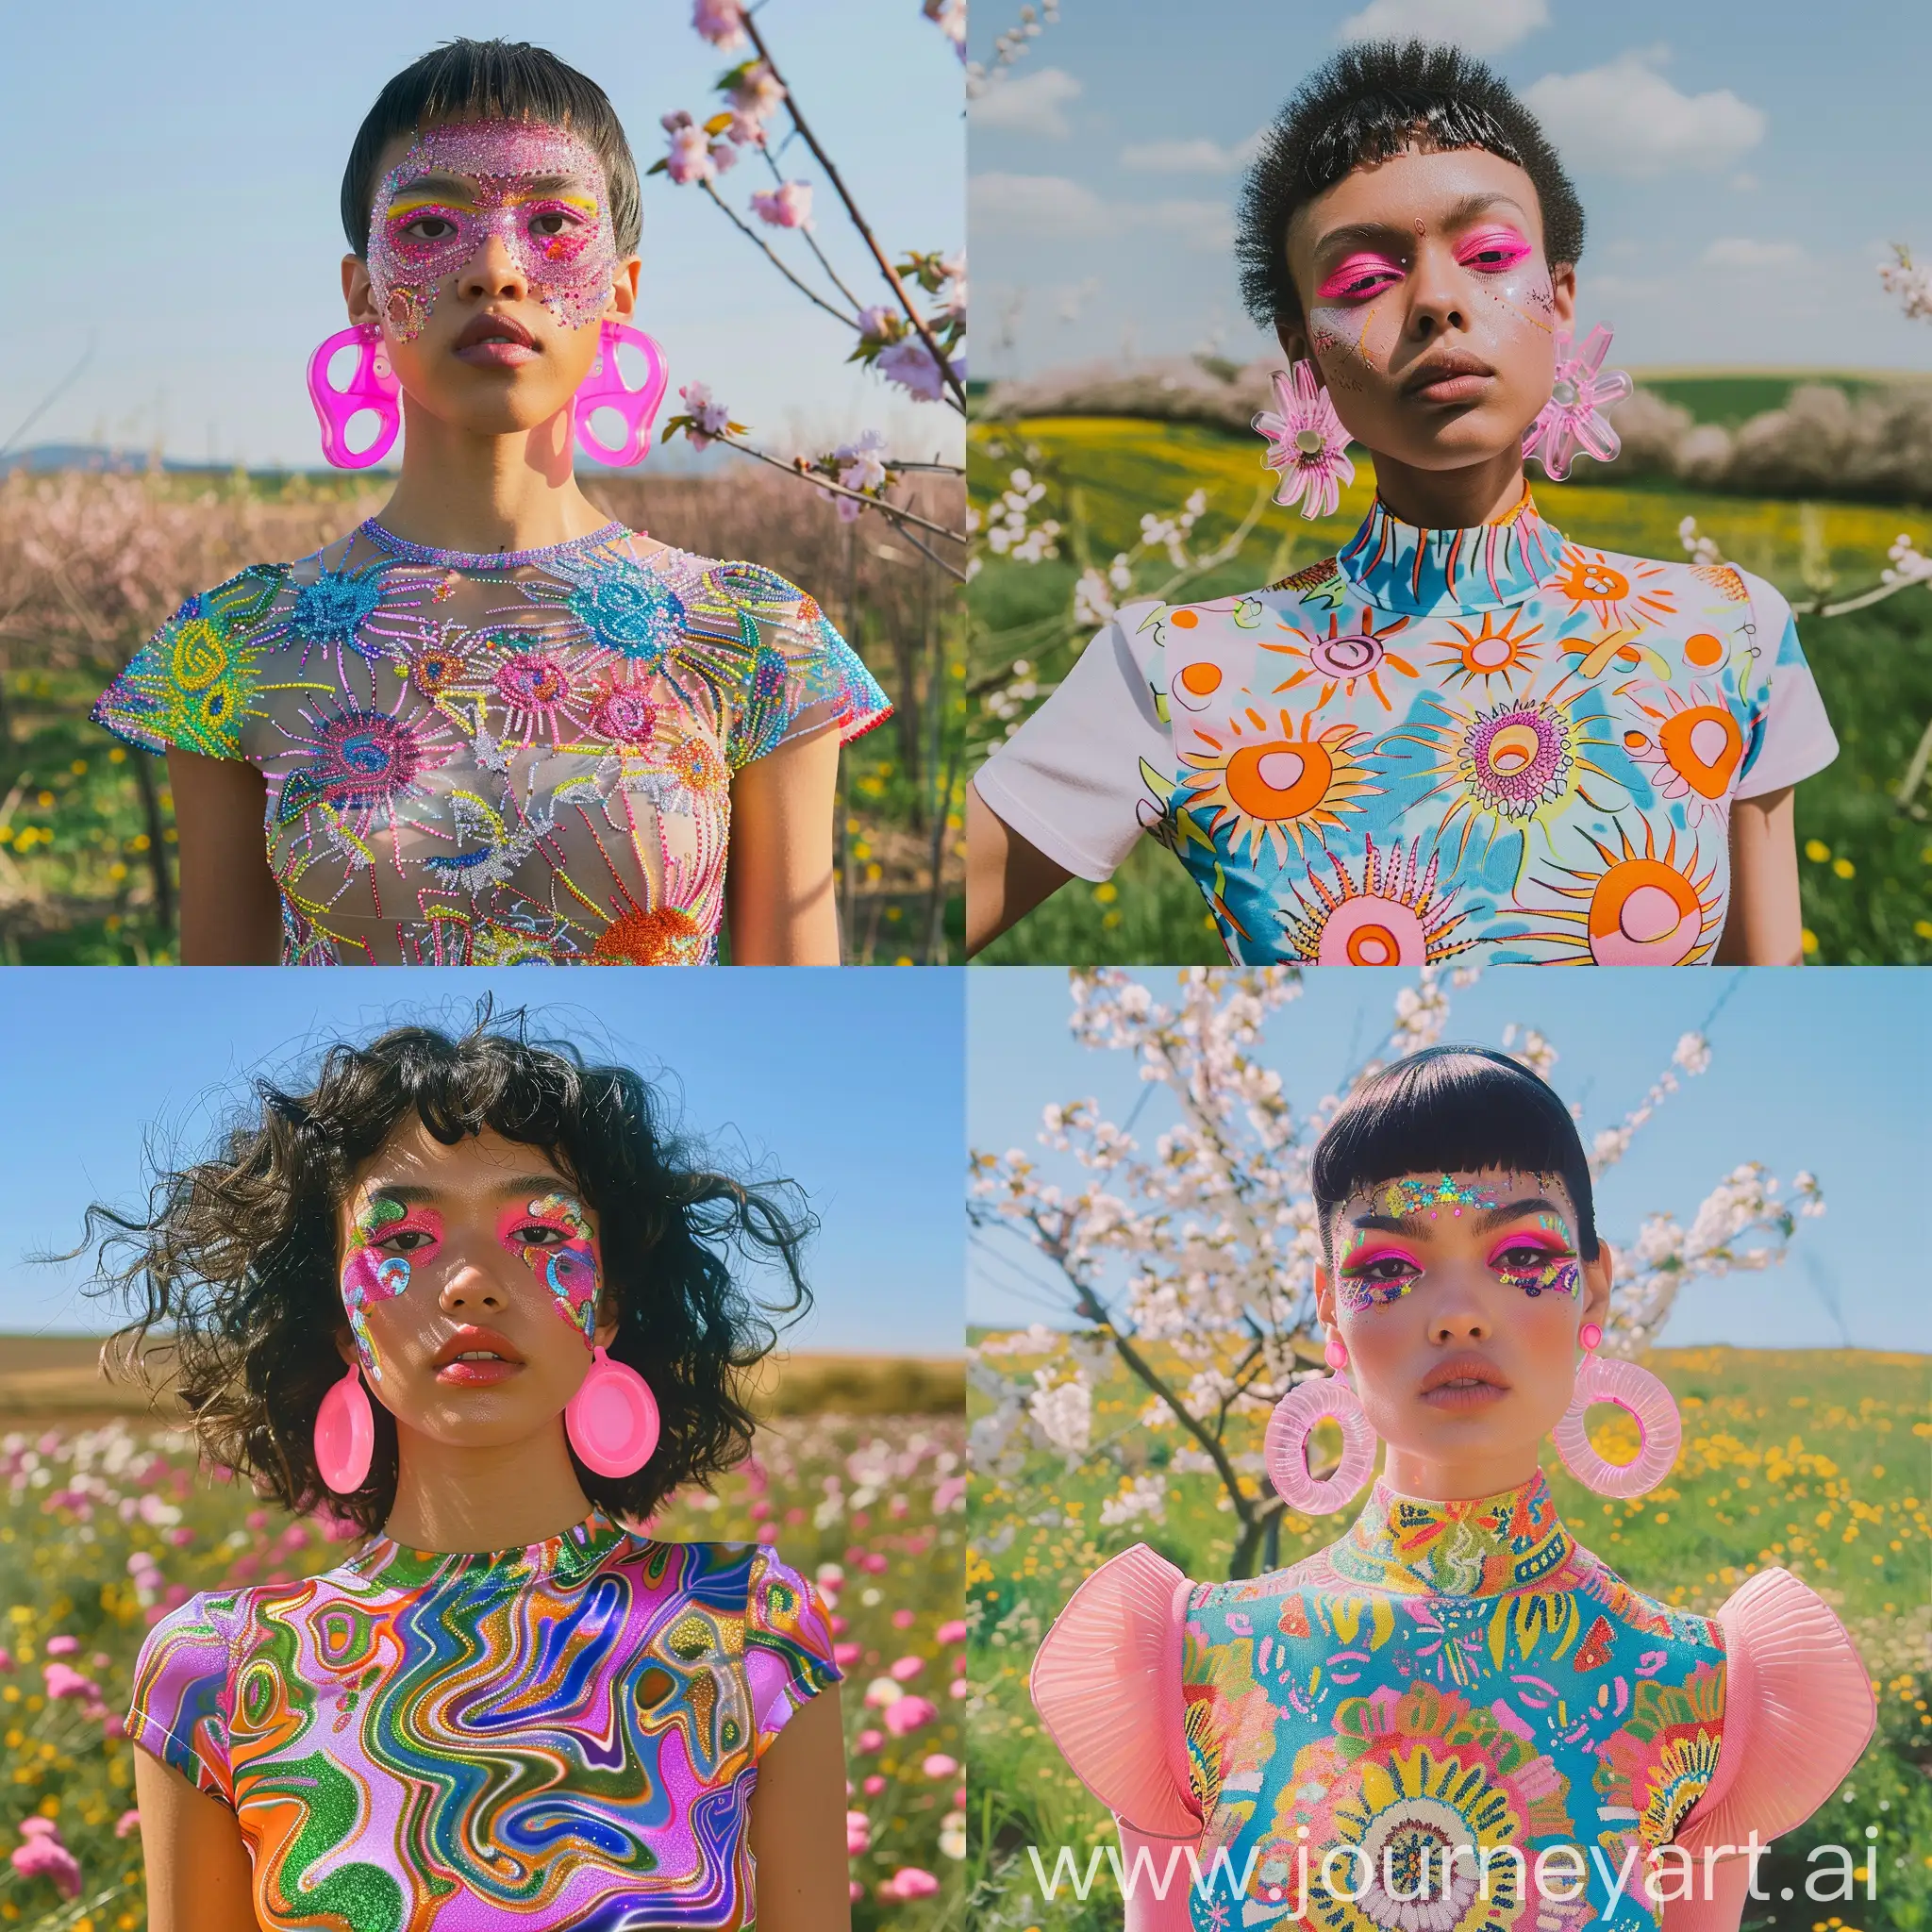 Colorful-Hypnotic-Fashion-Model-in-Blooming-Countryside